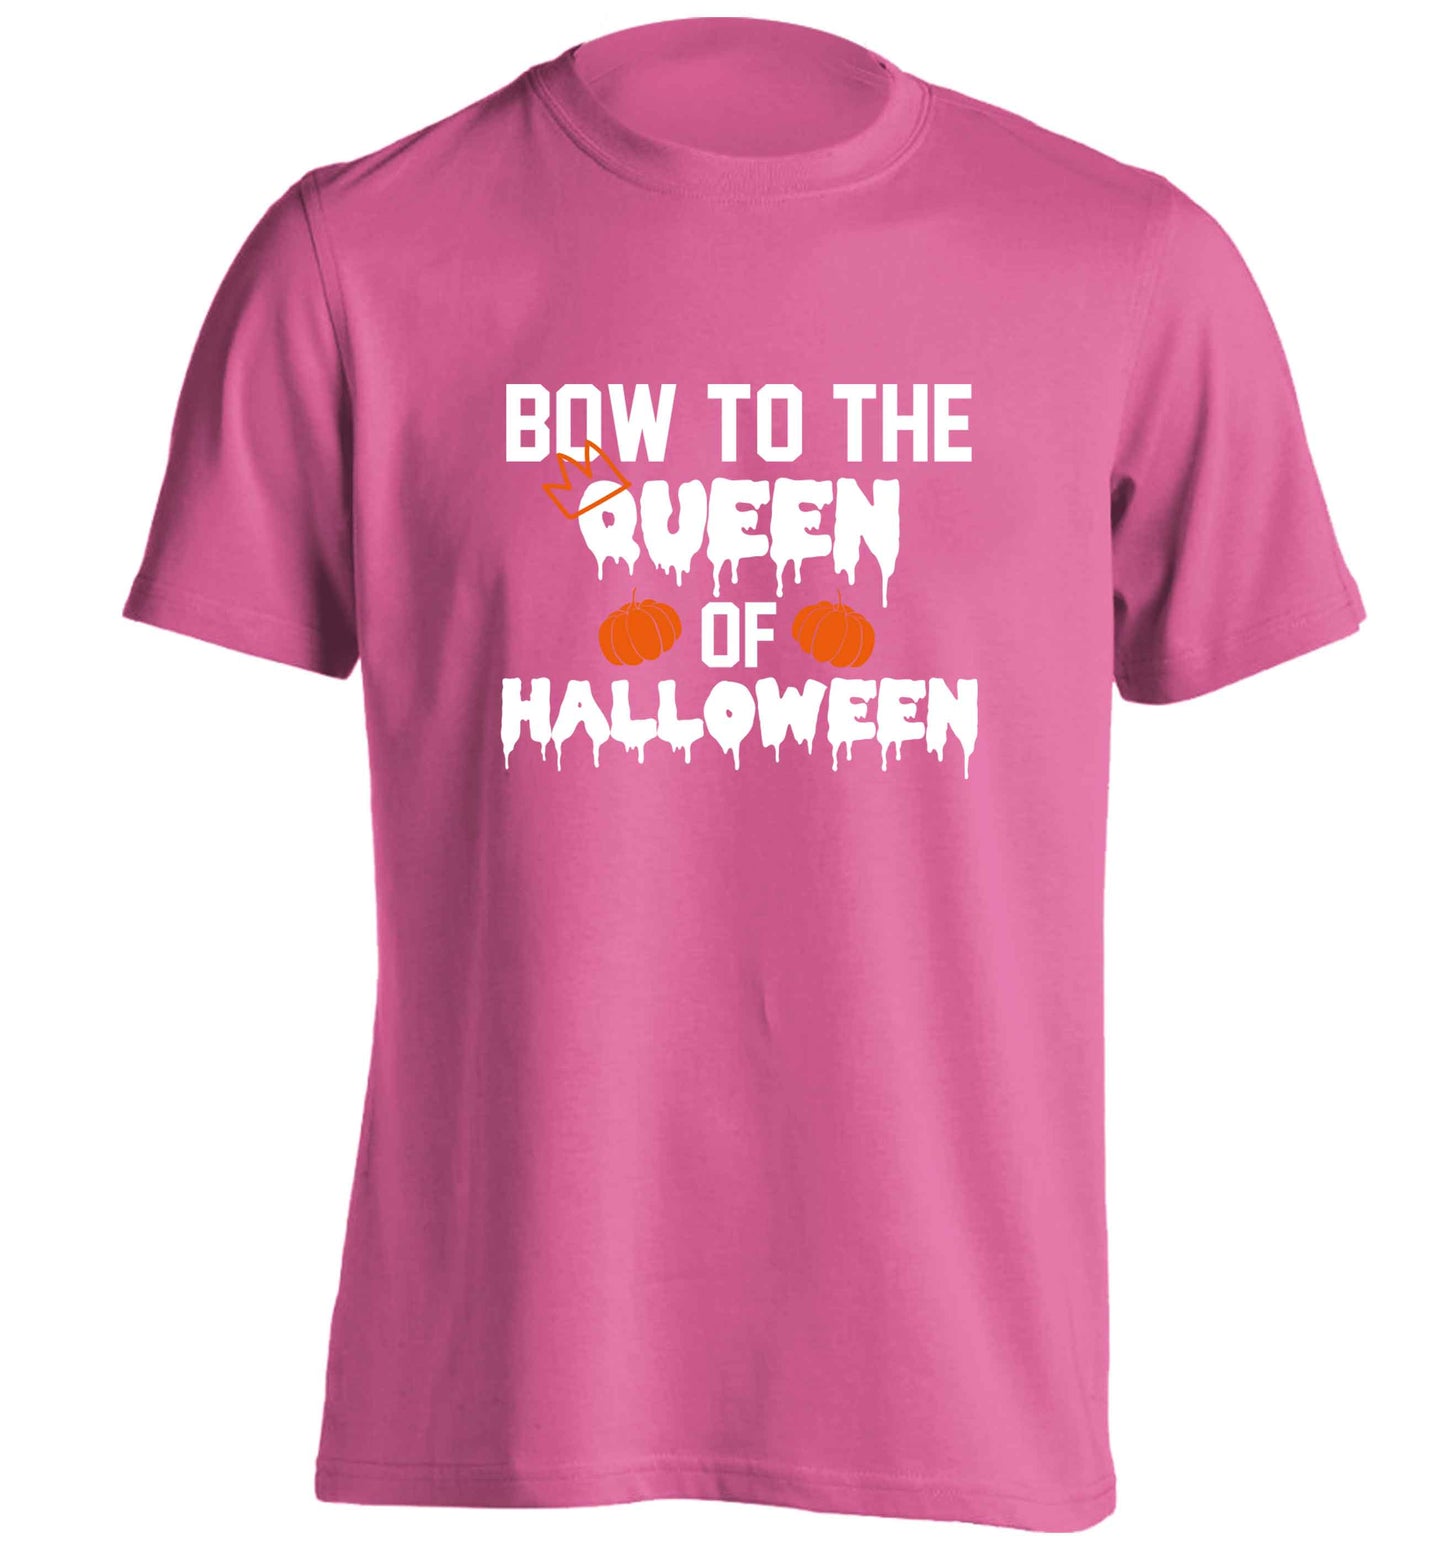 Bow to the Queen of halloween adults unisex pink Tshirt 2XL